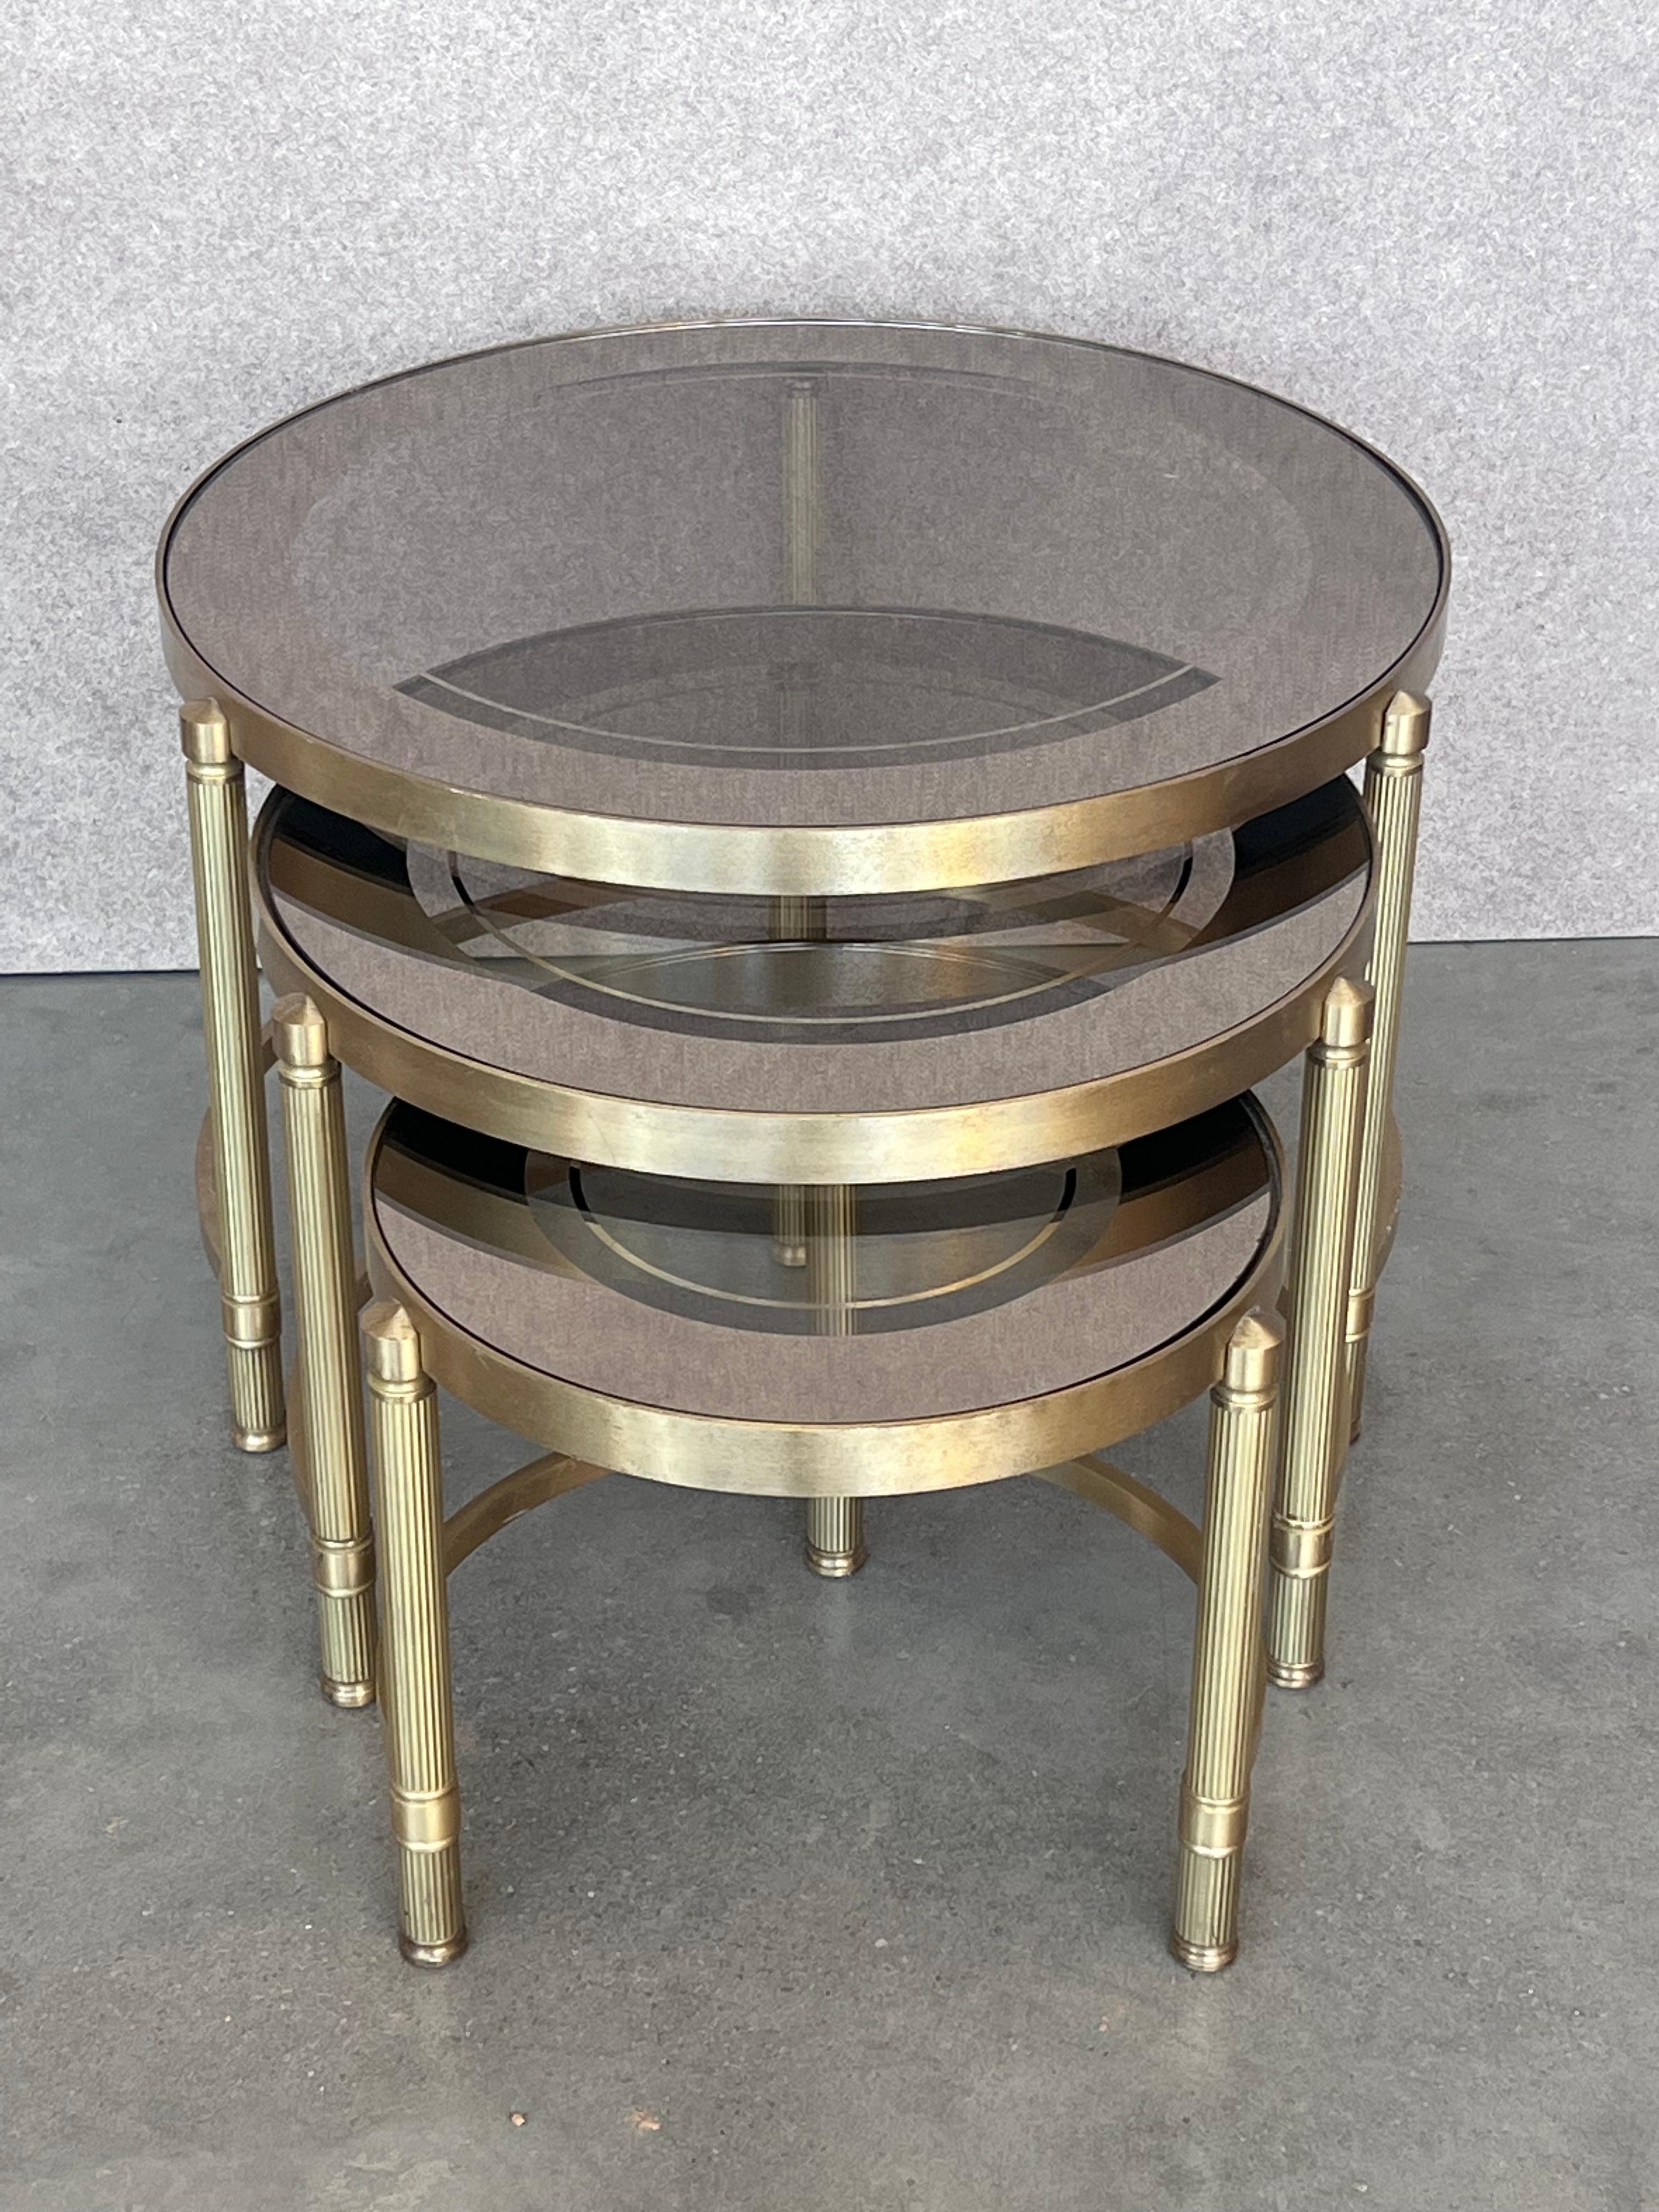 Set of three round brass nesting tables with decorative details and smoked glass tops. 

Measures: 
Small 14.75